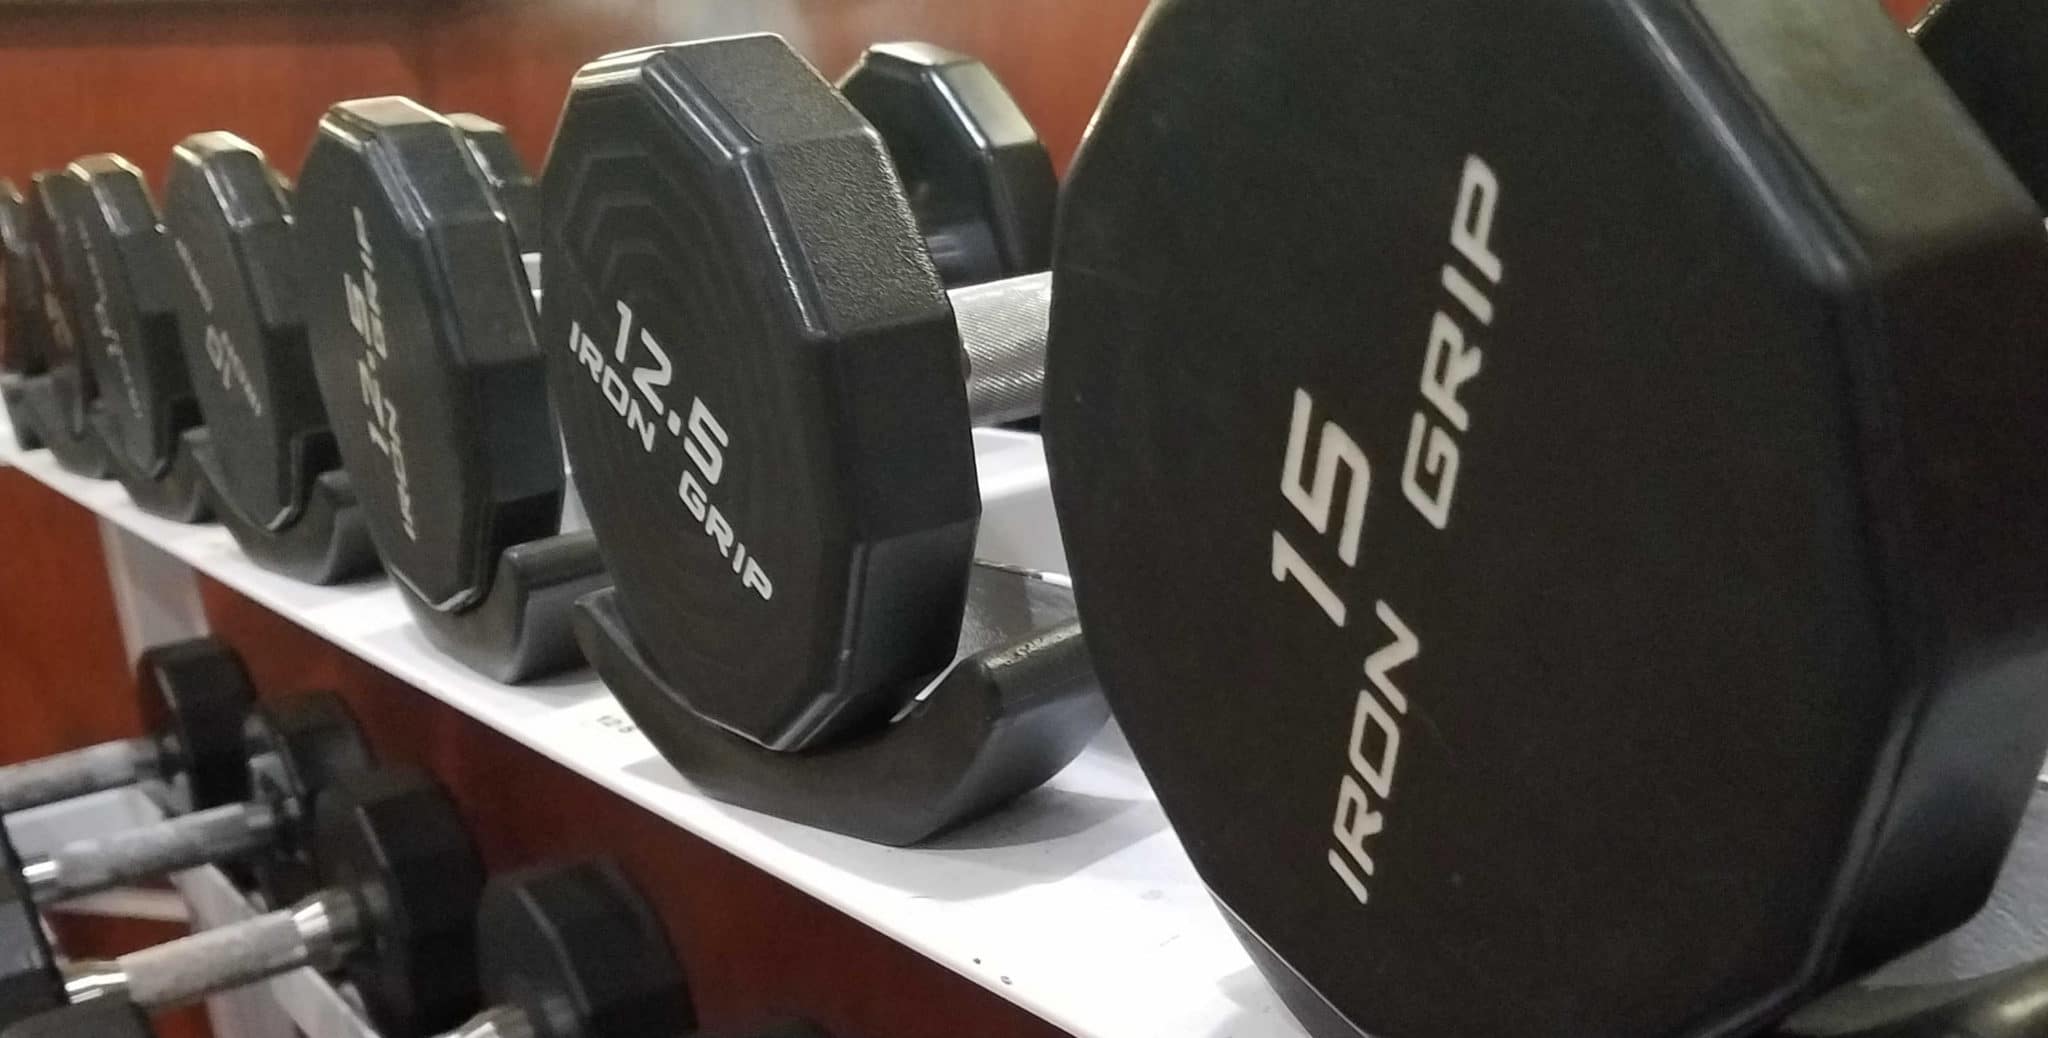 free weights or dumbbells used in strength training